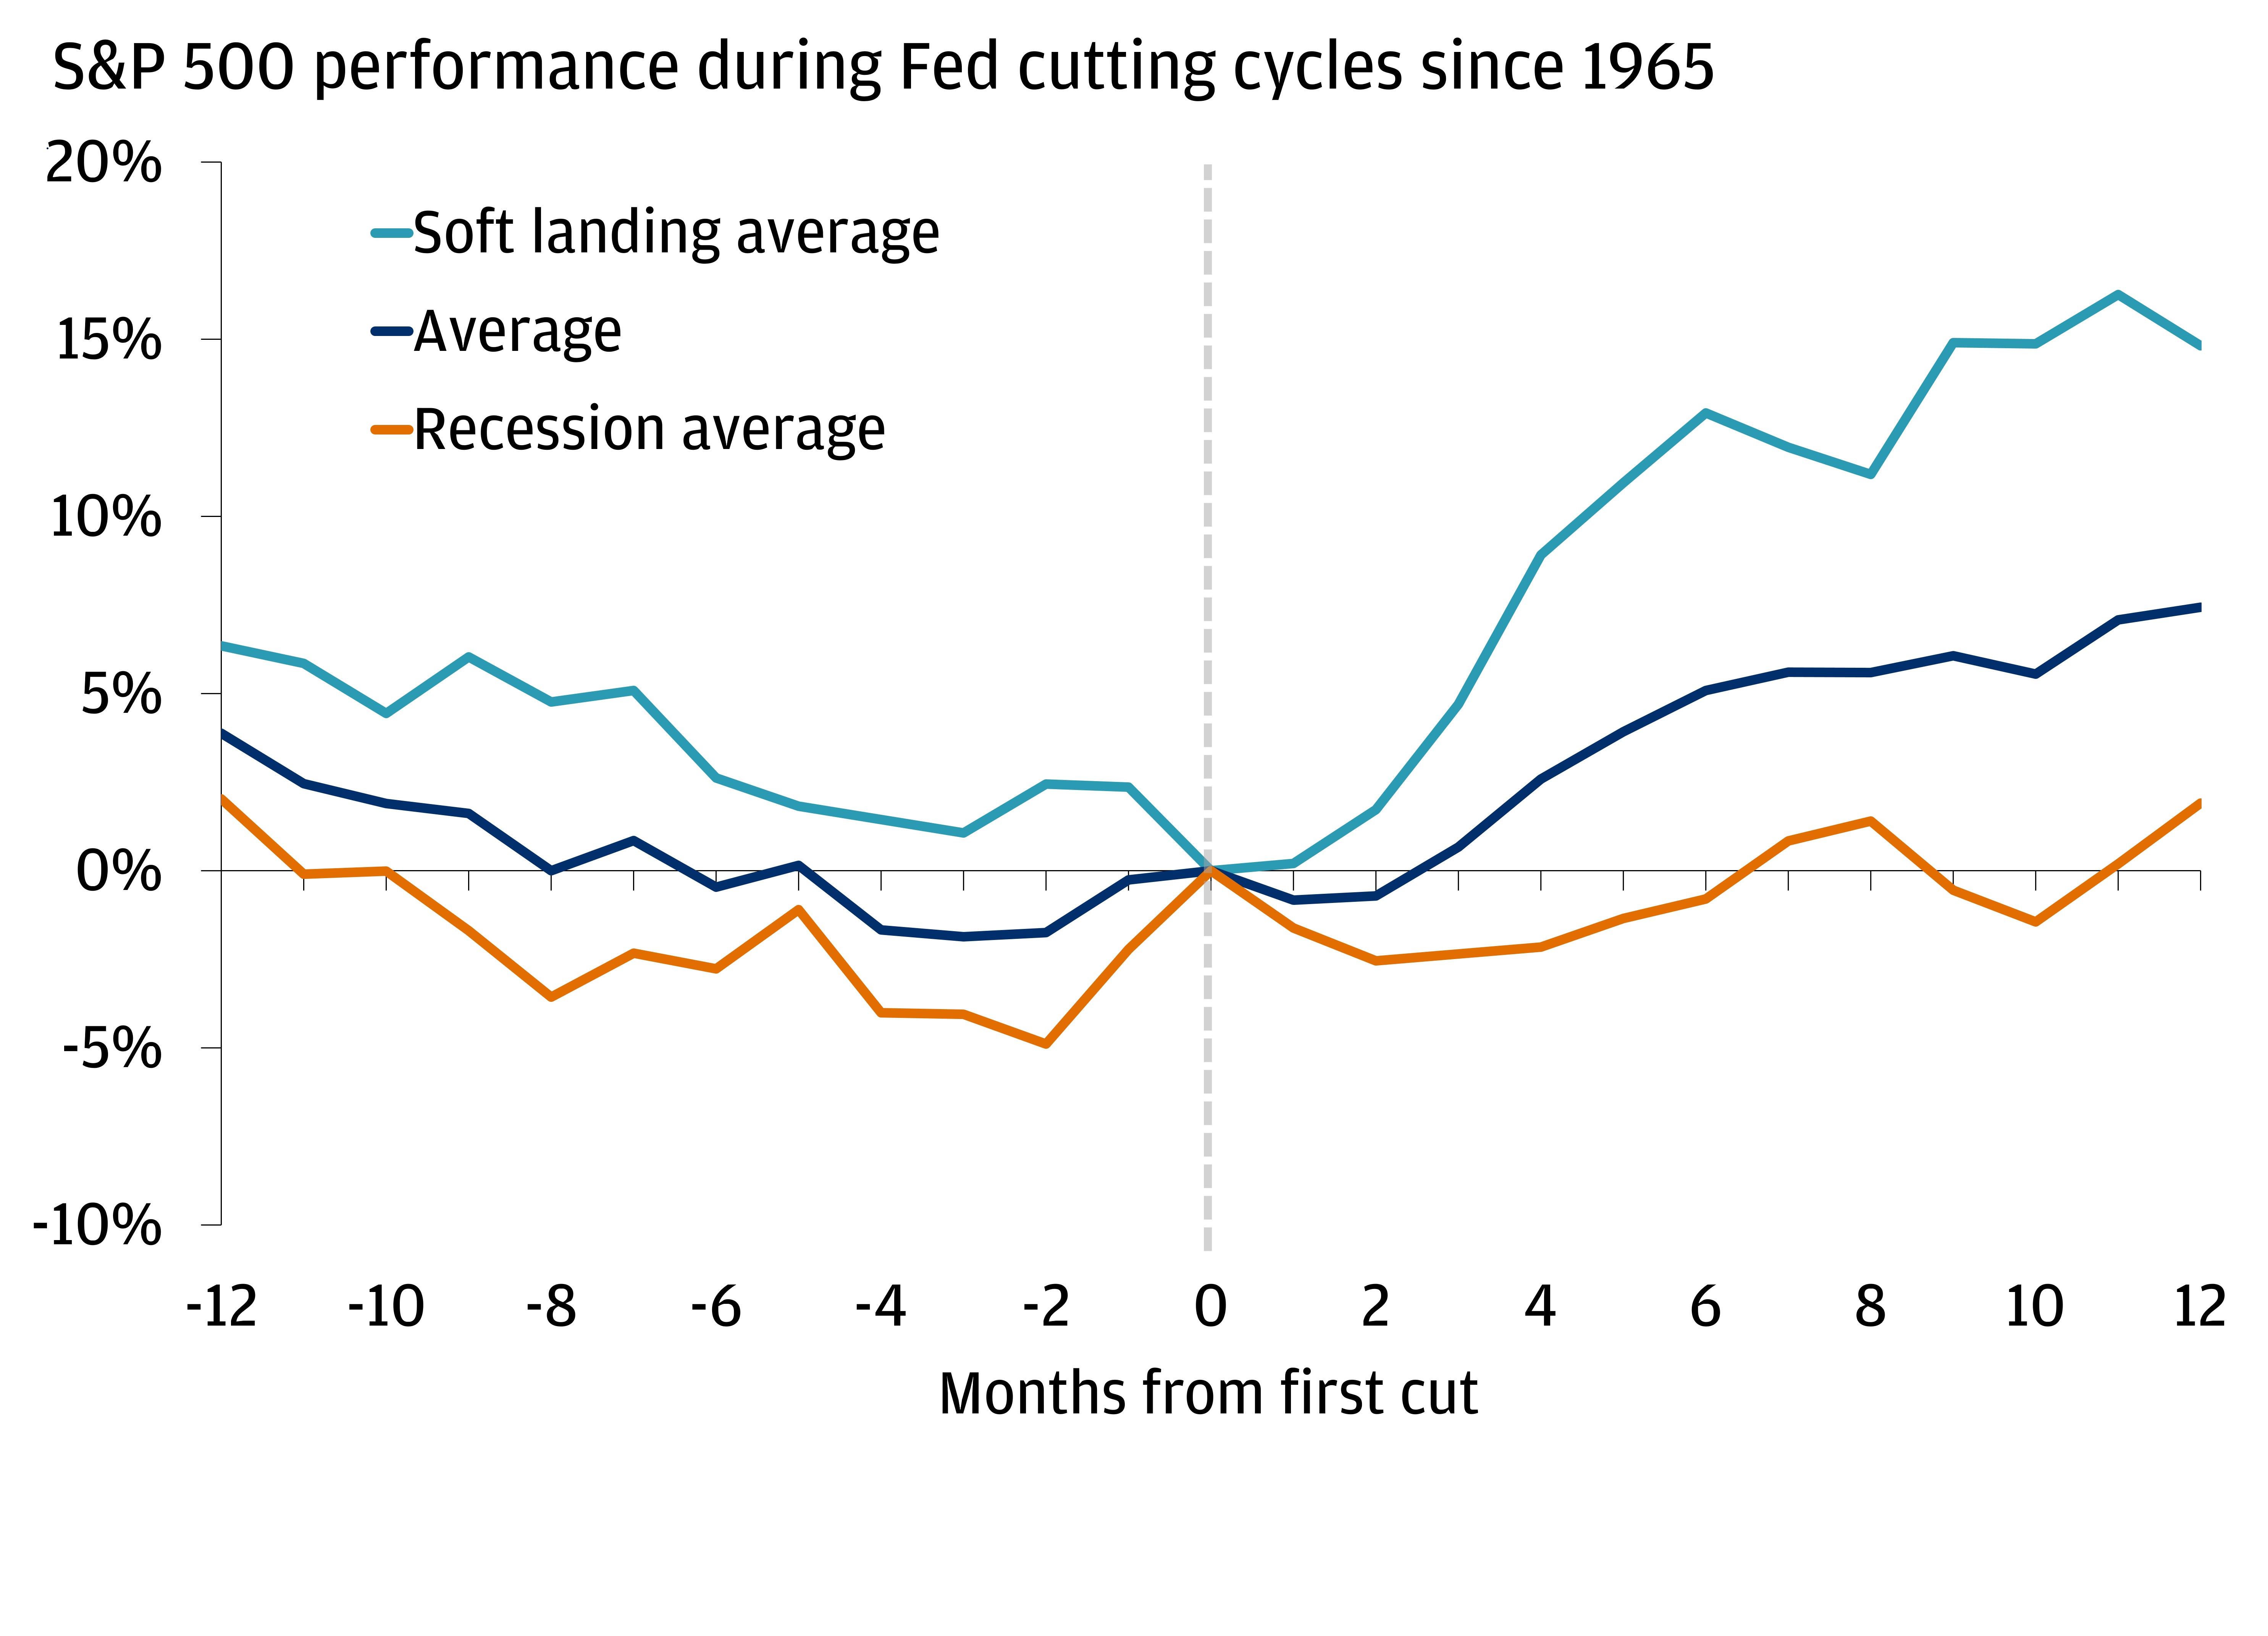 The chart describes S&P 500 performance during Fed cutting cycles since 1965.